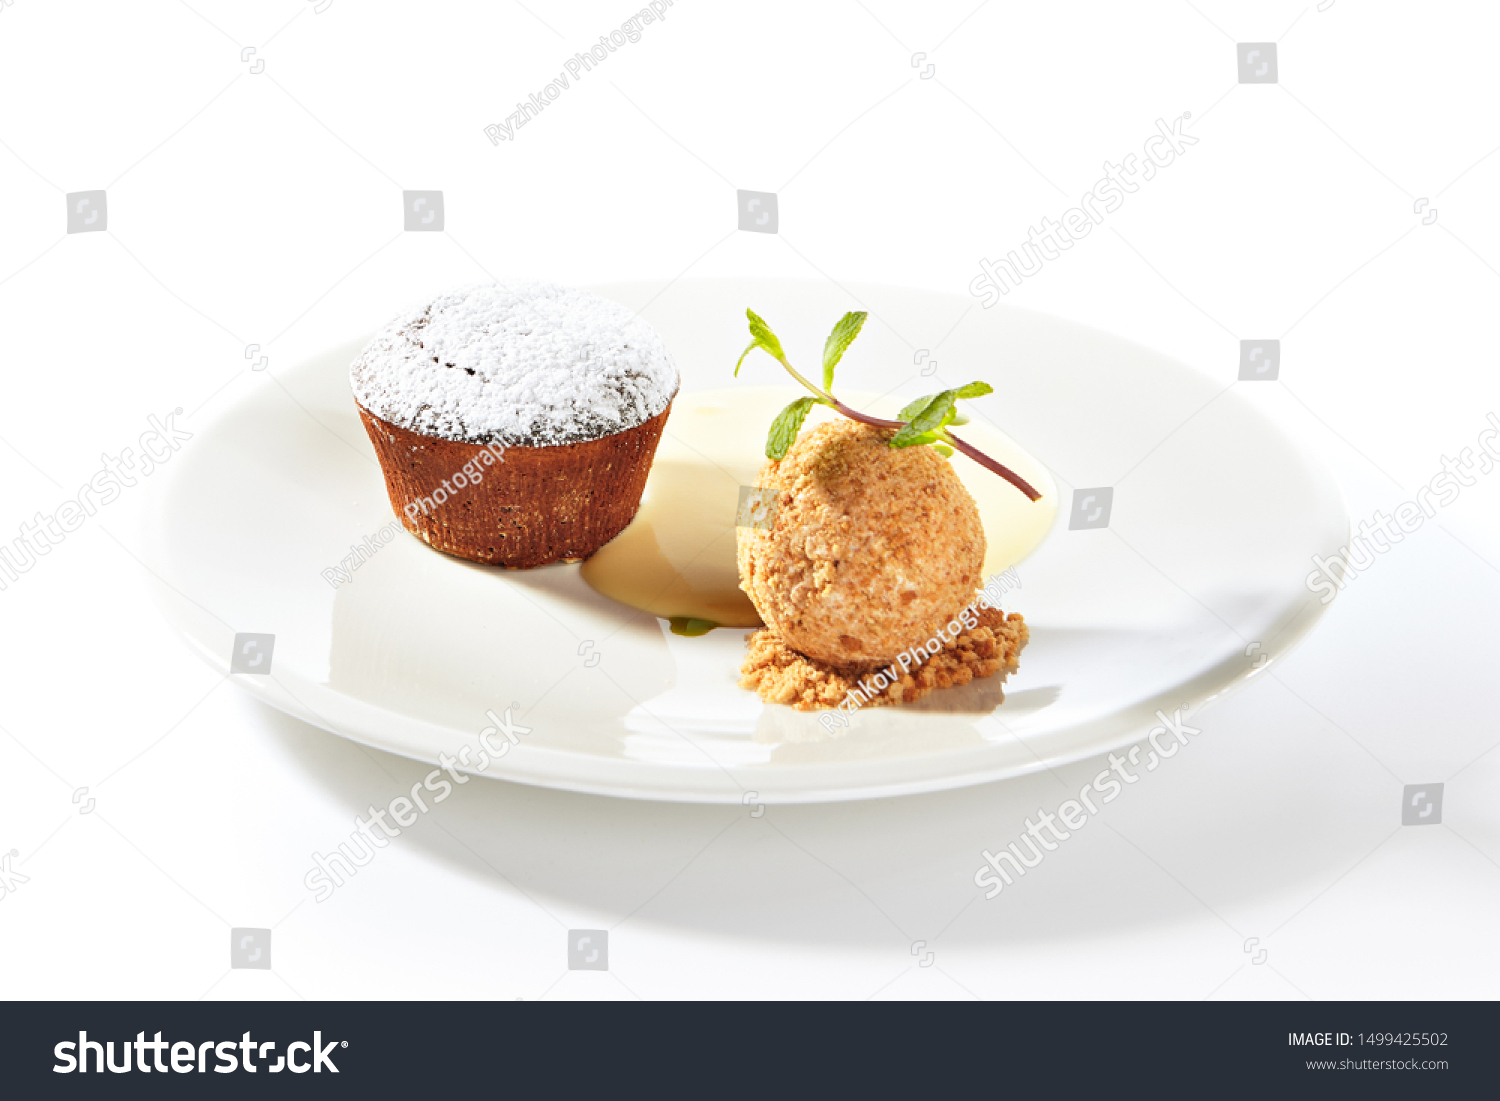 Whole hot chocolate fondant with ice cream ball and condense milk on white plate isolated. Restaurant dessert with fresh brownie, muffin or small chocolate cake with crunchy rind and mellow filling #1499425502